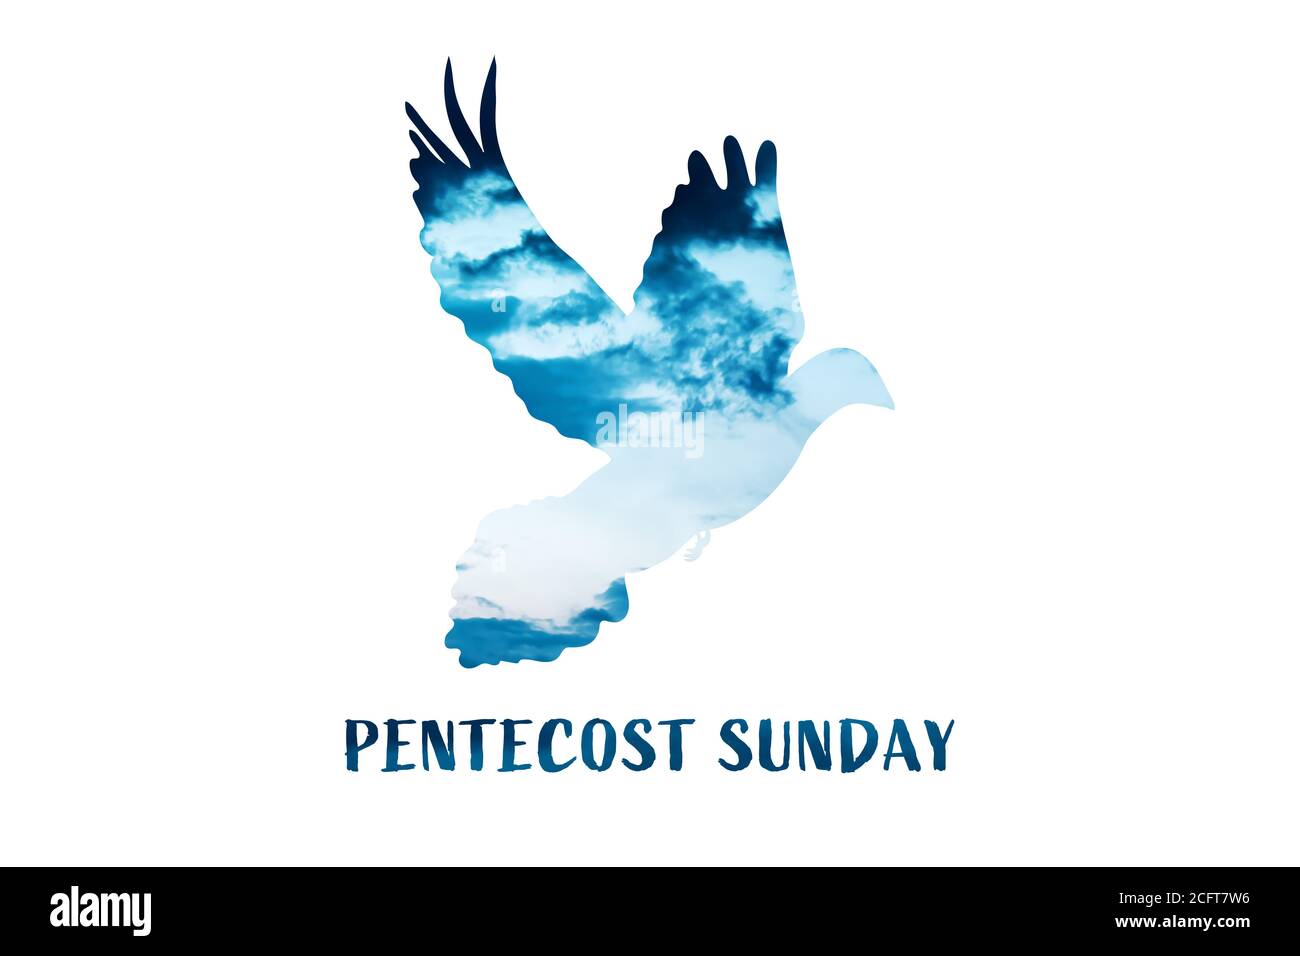 Christian worship and praise. Cloudy sky with dove and empty space. Text: PENTECOST SUNDAY Stock Photo